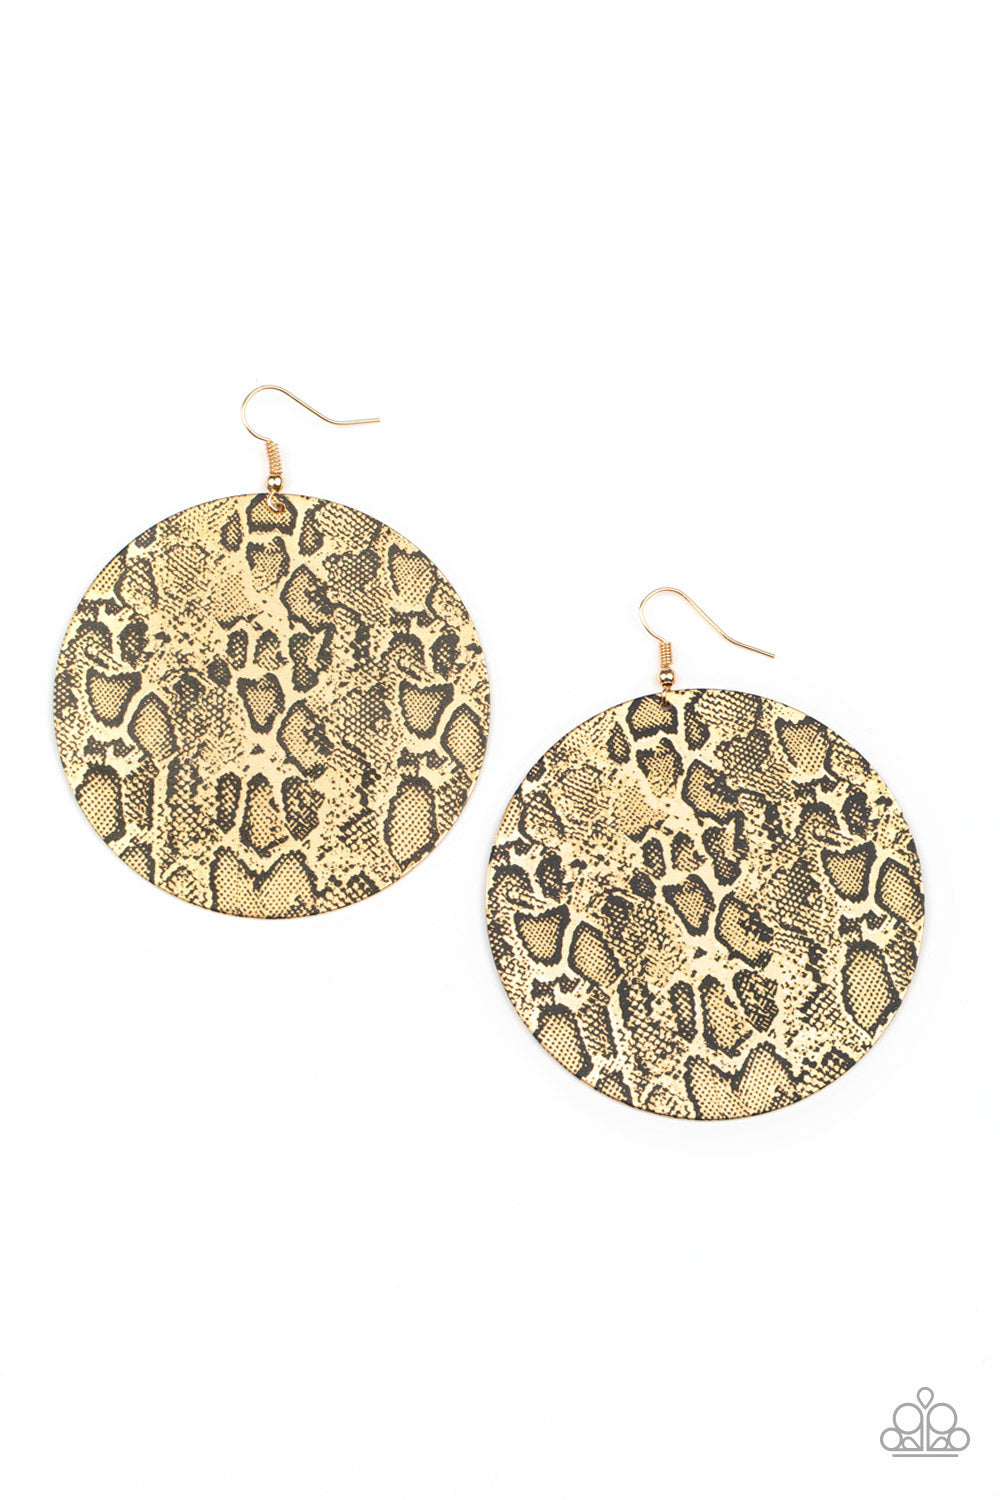 Paparazzi Animal Planet - Gold Earrings - A Finishing Touch 